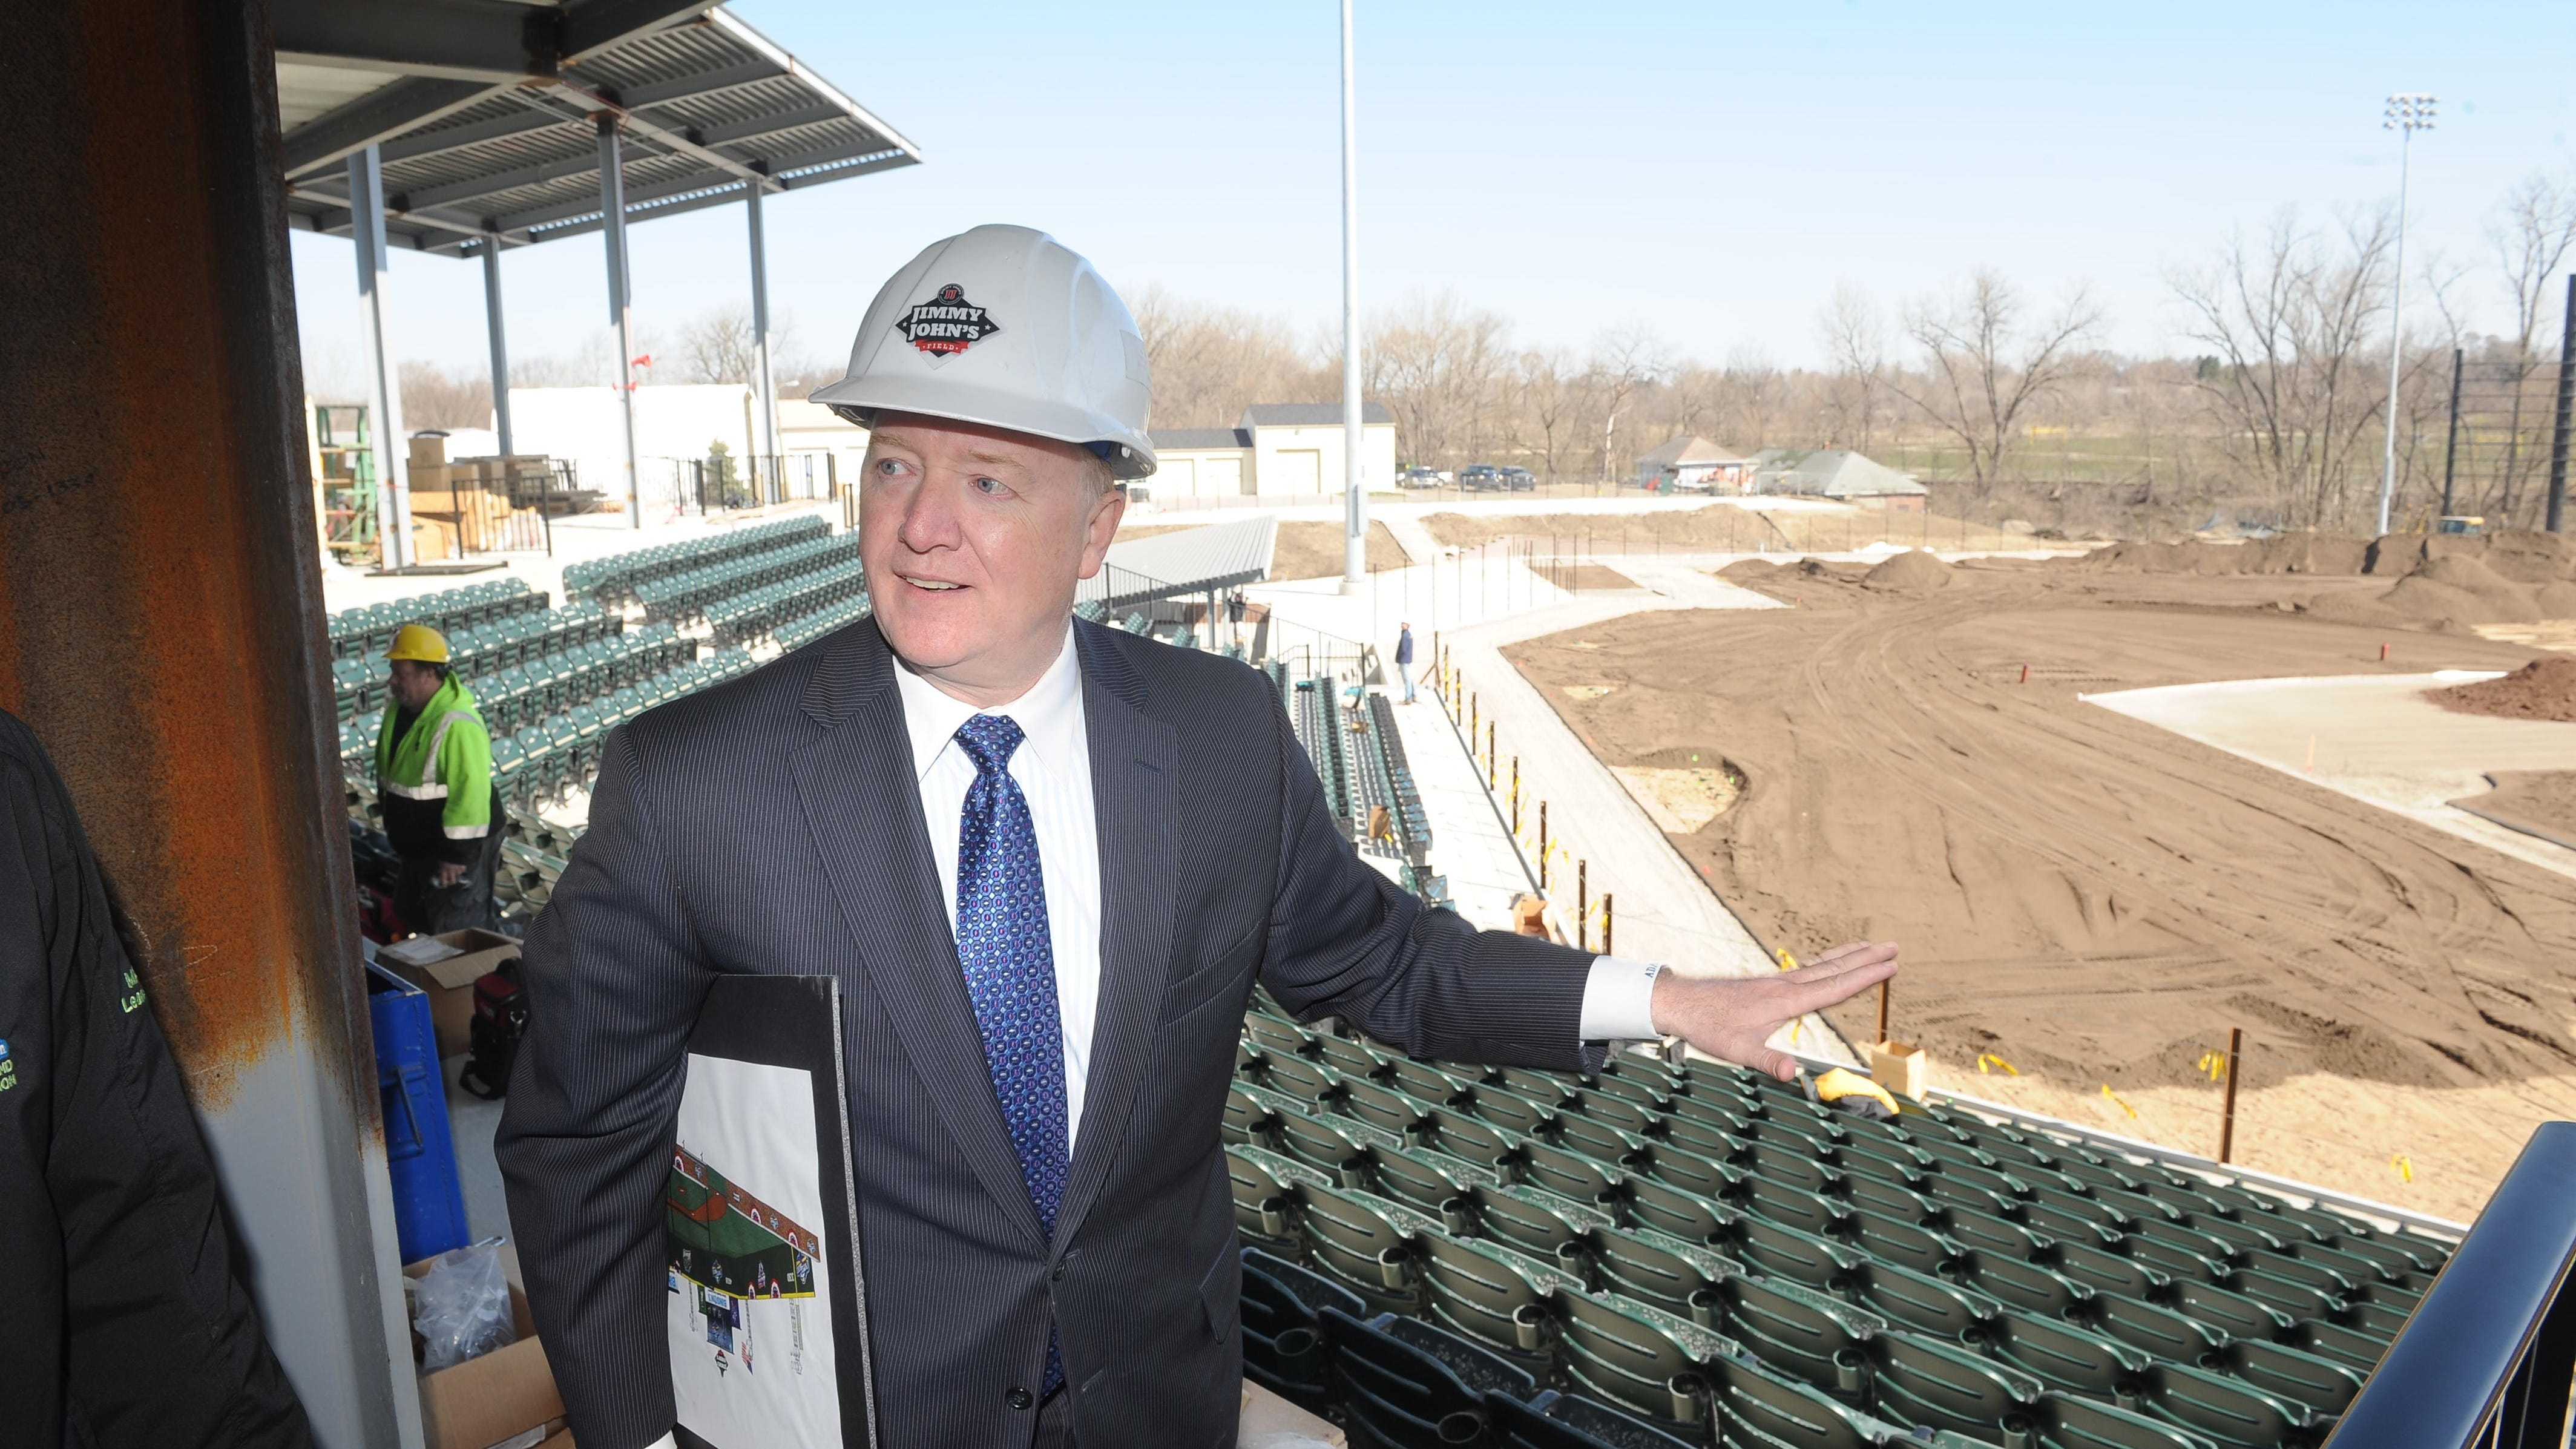 Andy Appleby calls his stadium and league project in Utica “an eight-year overnight success.”